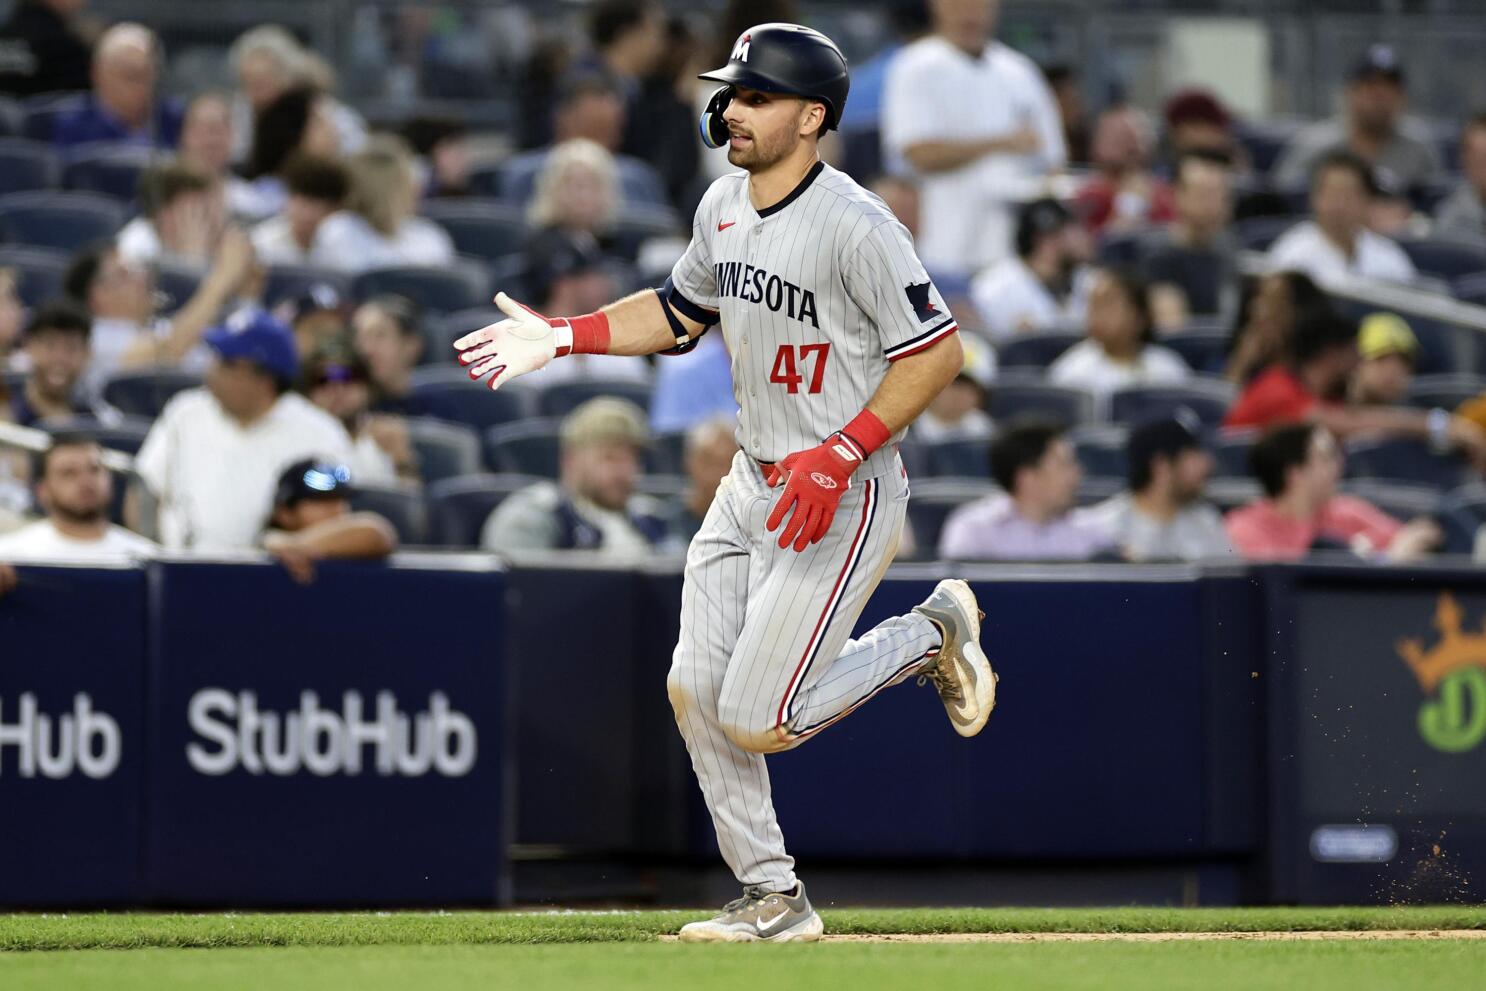 Nine-run first inning sends Twins to rout of Yankees